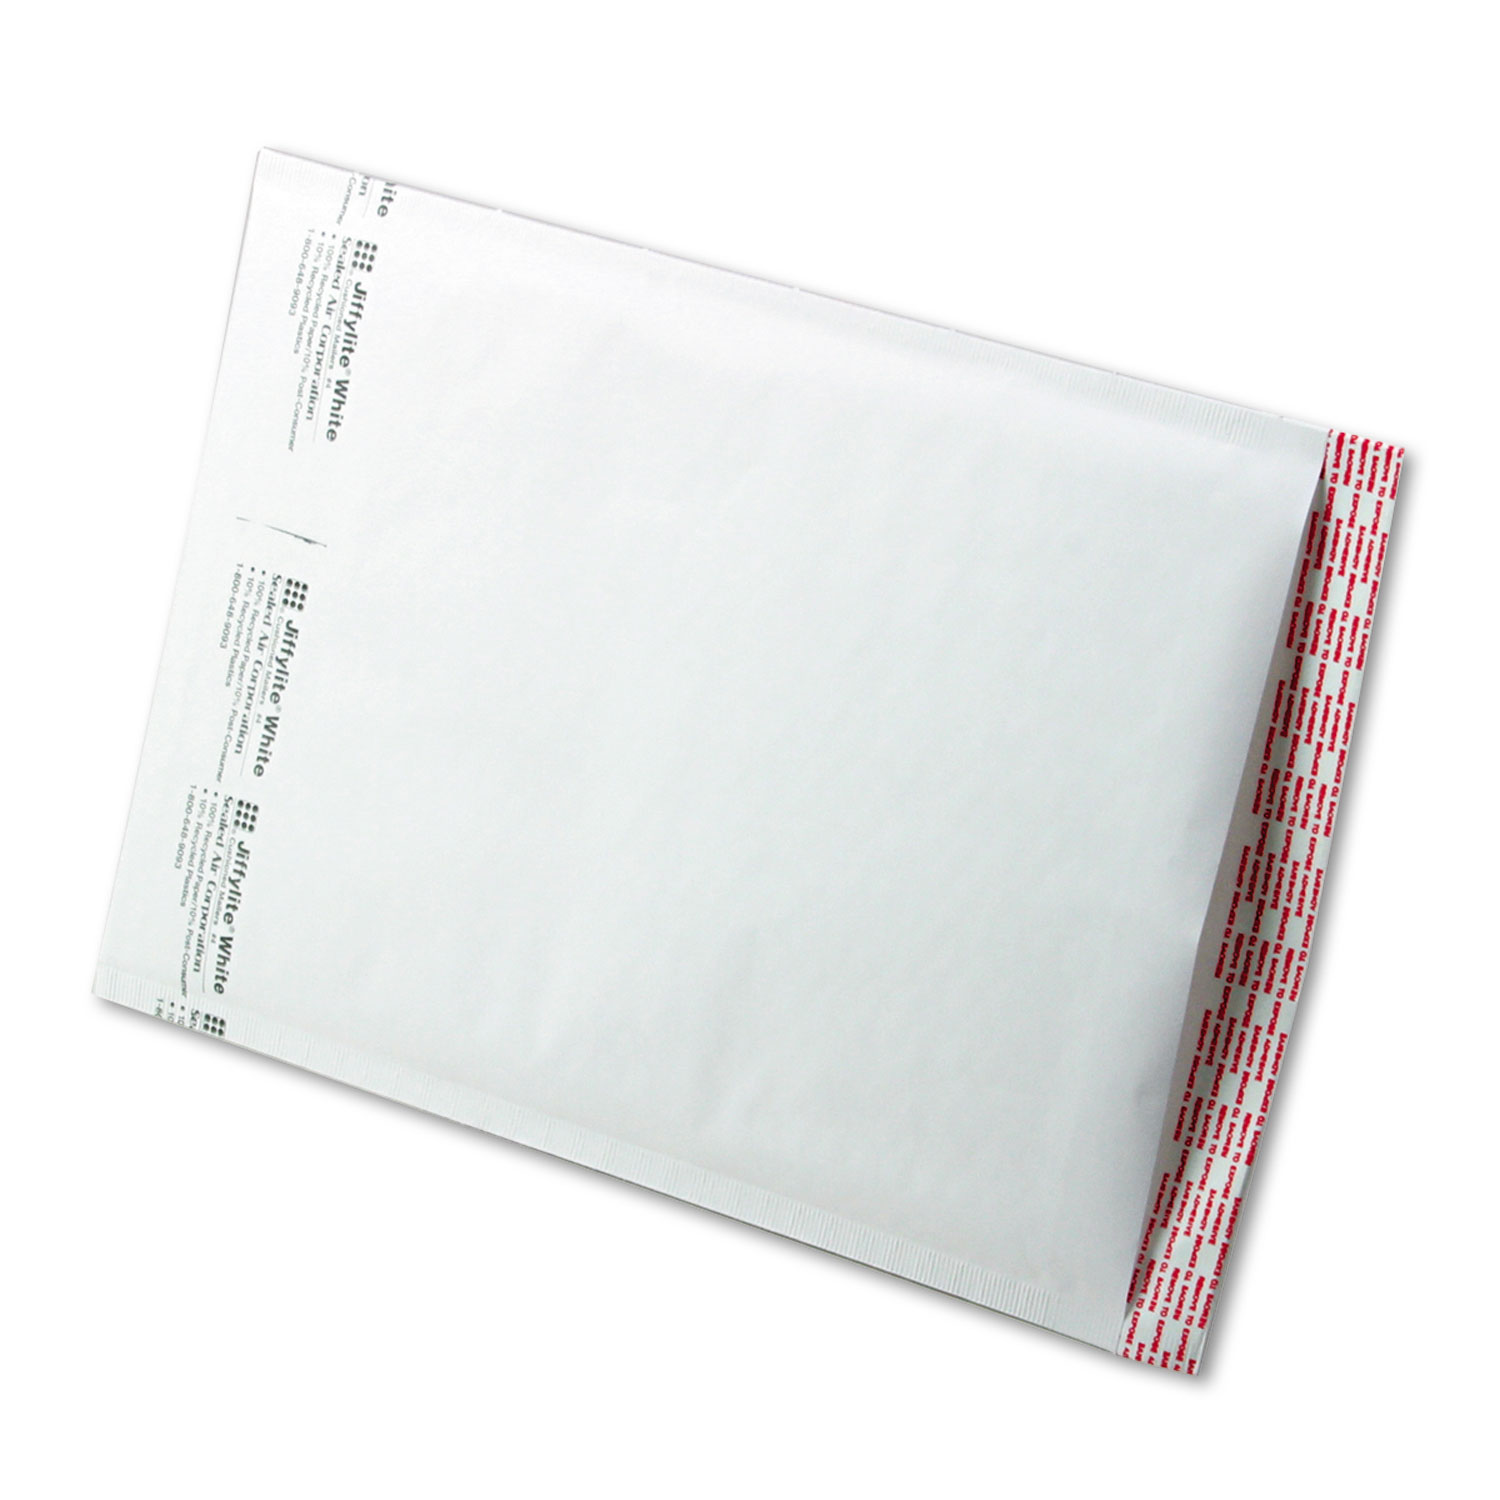  Sealed Air 39260 Jiffylite Self-Seal Bubble Mailer, #4, Barrier Bubble Lining, Self-Adhesive Closure, 9.5 x 14.5, White, 100/Carton (SEL39260) 